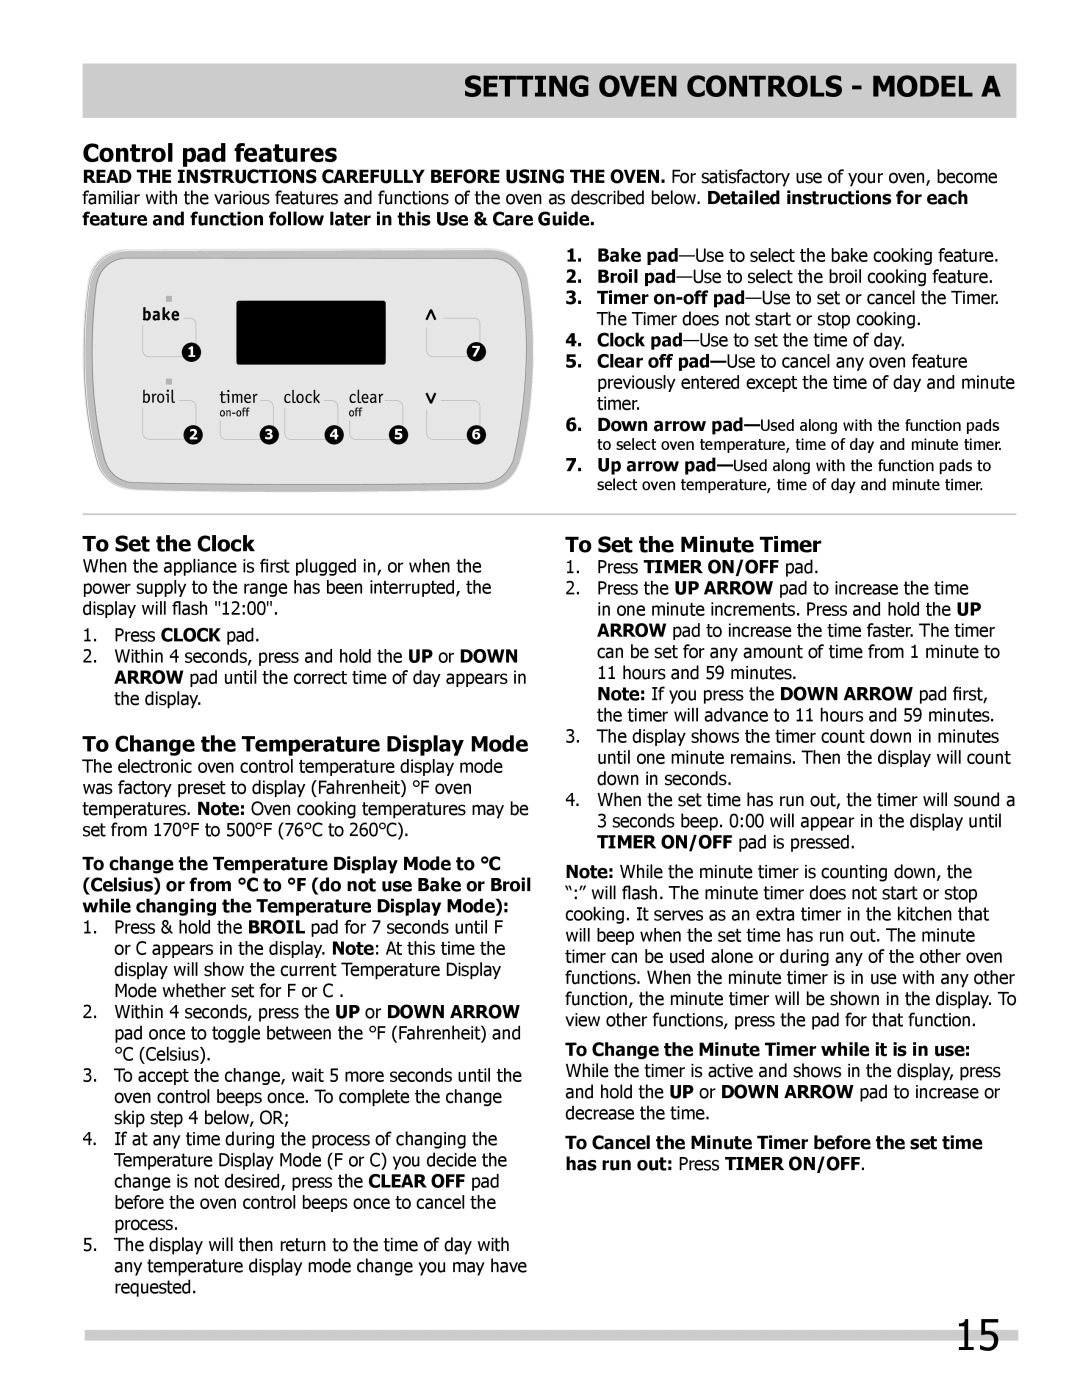 Frigidaire B manual Setting OVEN controls - Model A, Control pad features, To Set the Clock, To Set the Minute Timer 